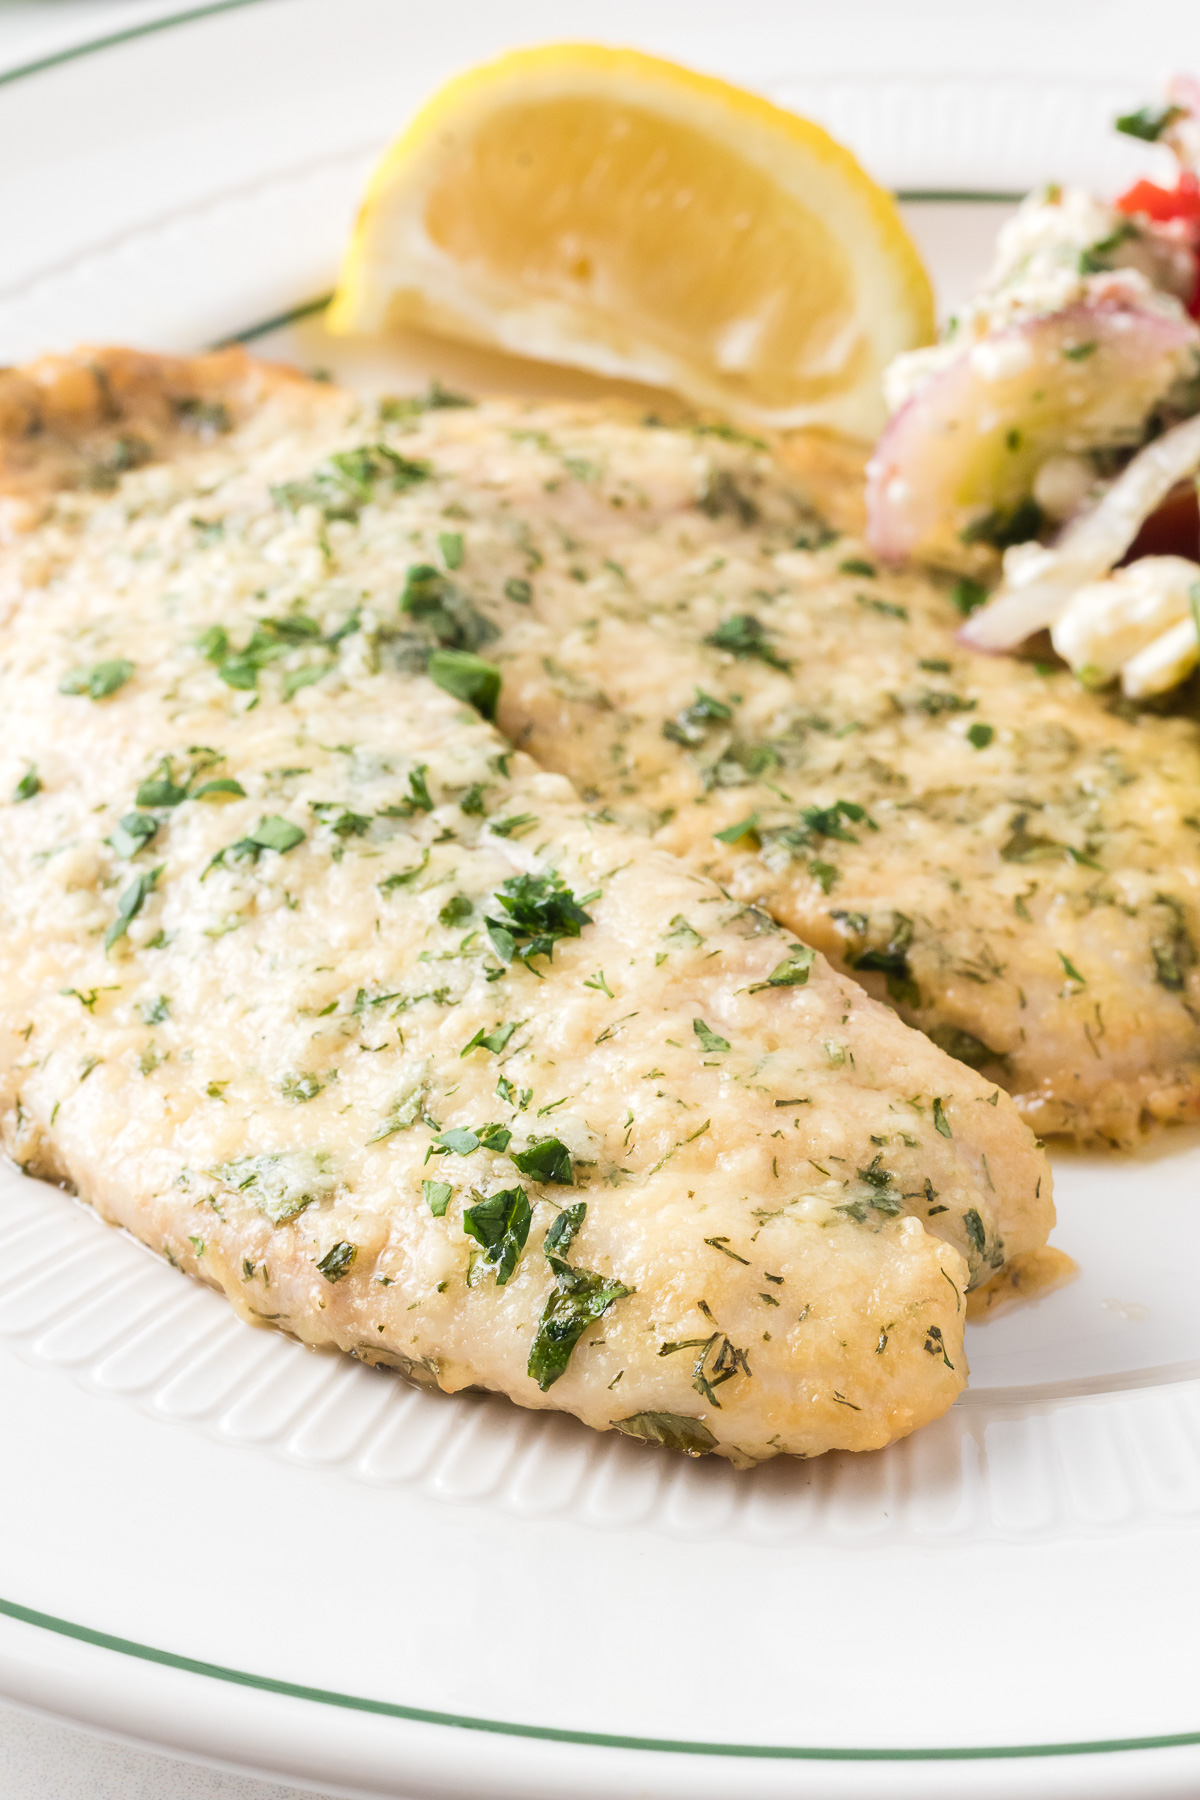 This Parmesan Tilapia is an easy low-carb option for dinner with a cooking time under 20 minutes. It's amazing what a little olive oil, fresh herbs, and freshly grated cheese can do to spice up a simple piece of fish! This recipe is perfect for a busy weeknight meal, and it’s light and full of flavor. How can you say no to that? via @foodhussy